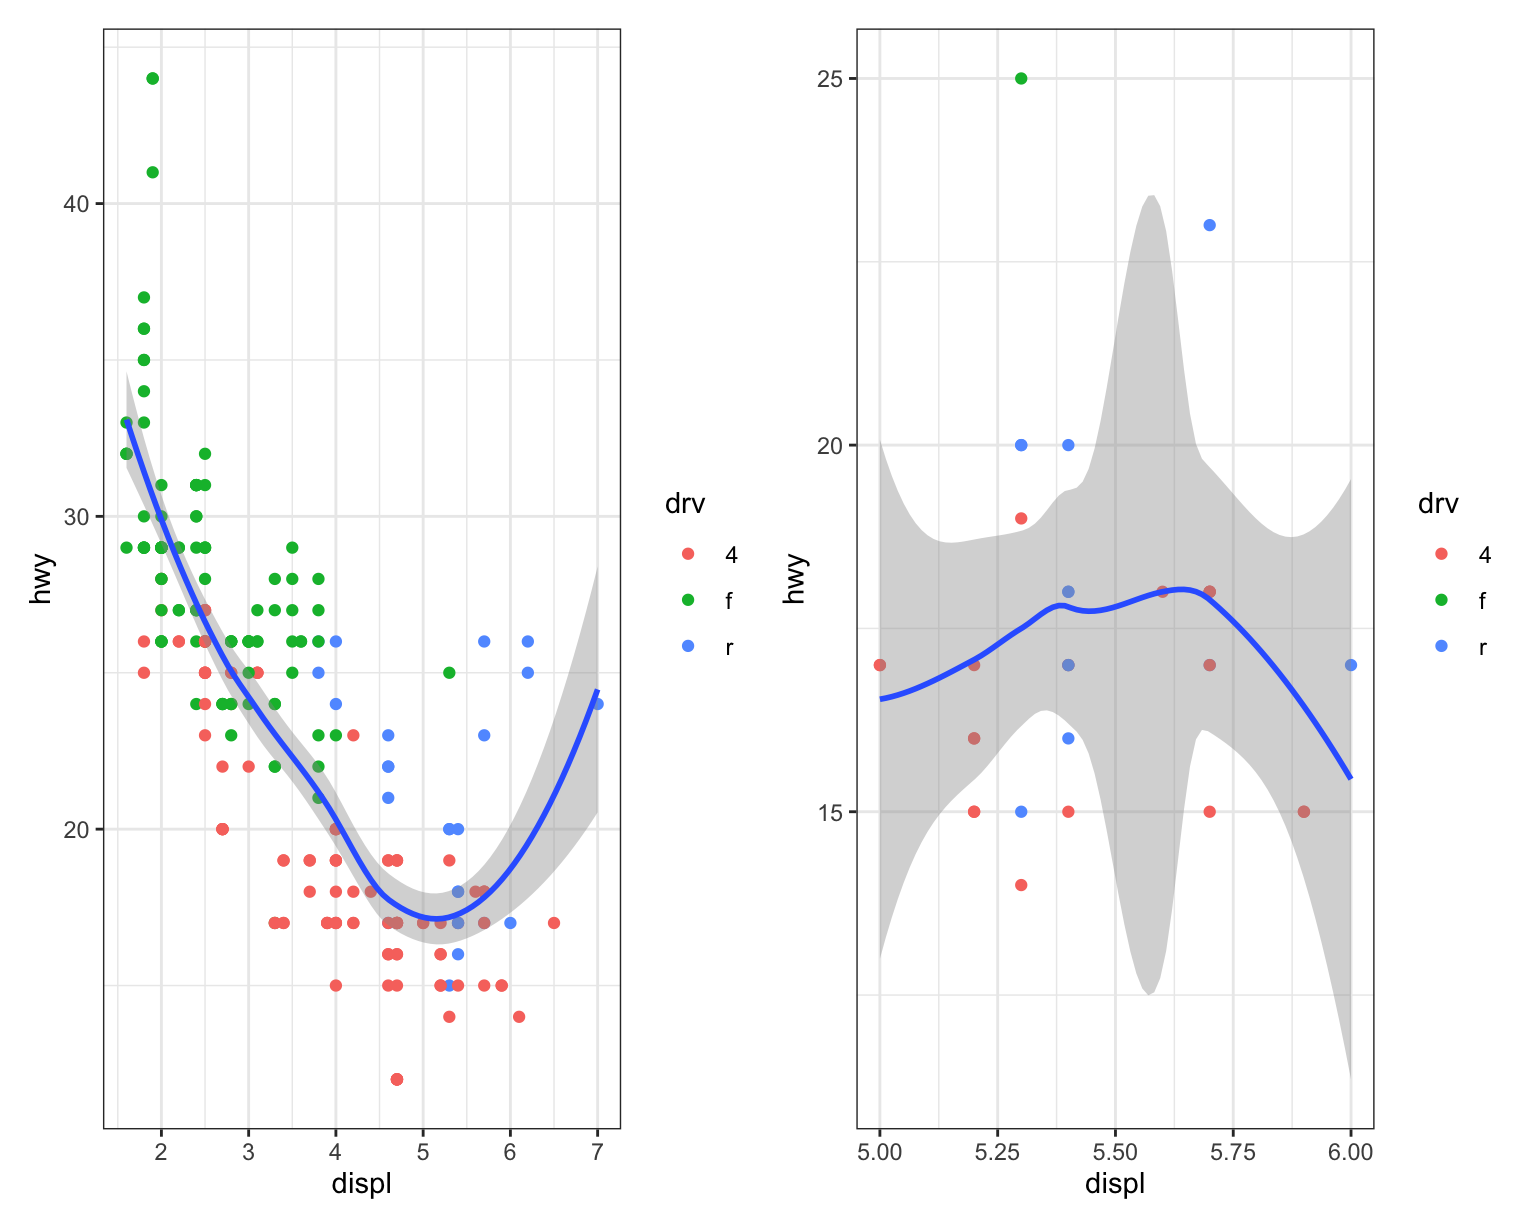 On the left, scatterplot of highway mileage vs. displacement, with
displacement. The smooth curve overlaid shows a decreasing, and then
increasing trend, like a hockey stick. On the right, same variables
are plotted with displacement ranging only from 5 to 6 and highway
mileage ranging only from 10 to 25. The smooth curve overlaid shows a
trend that's slightly increasing first and then decreasing.